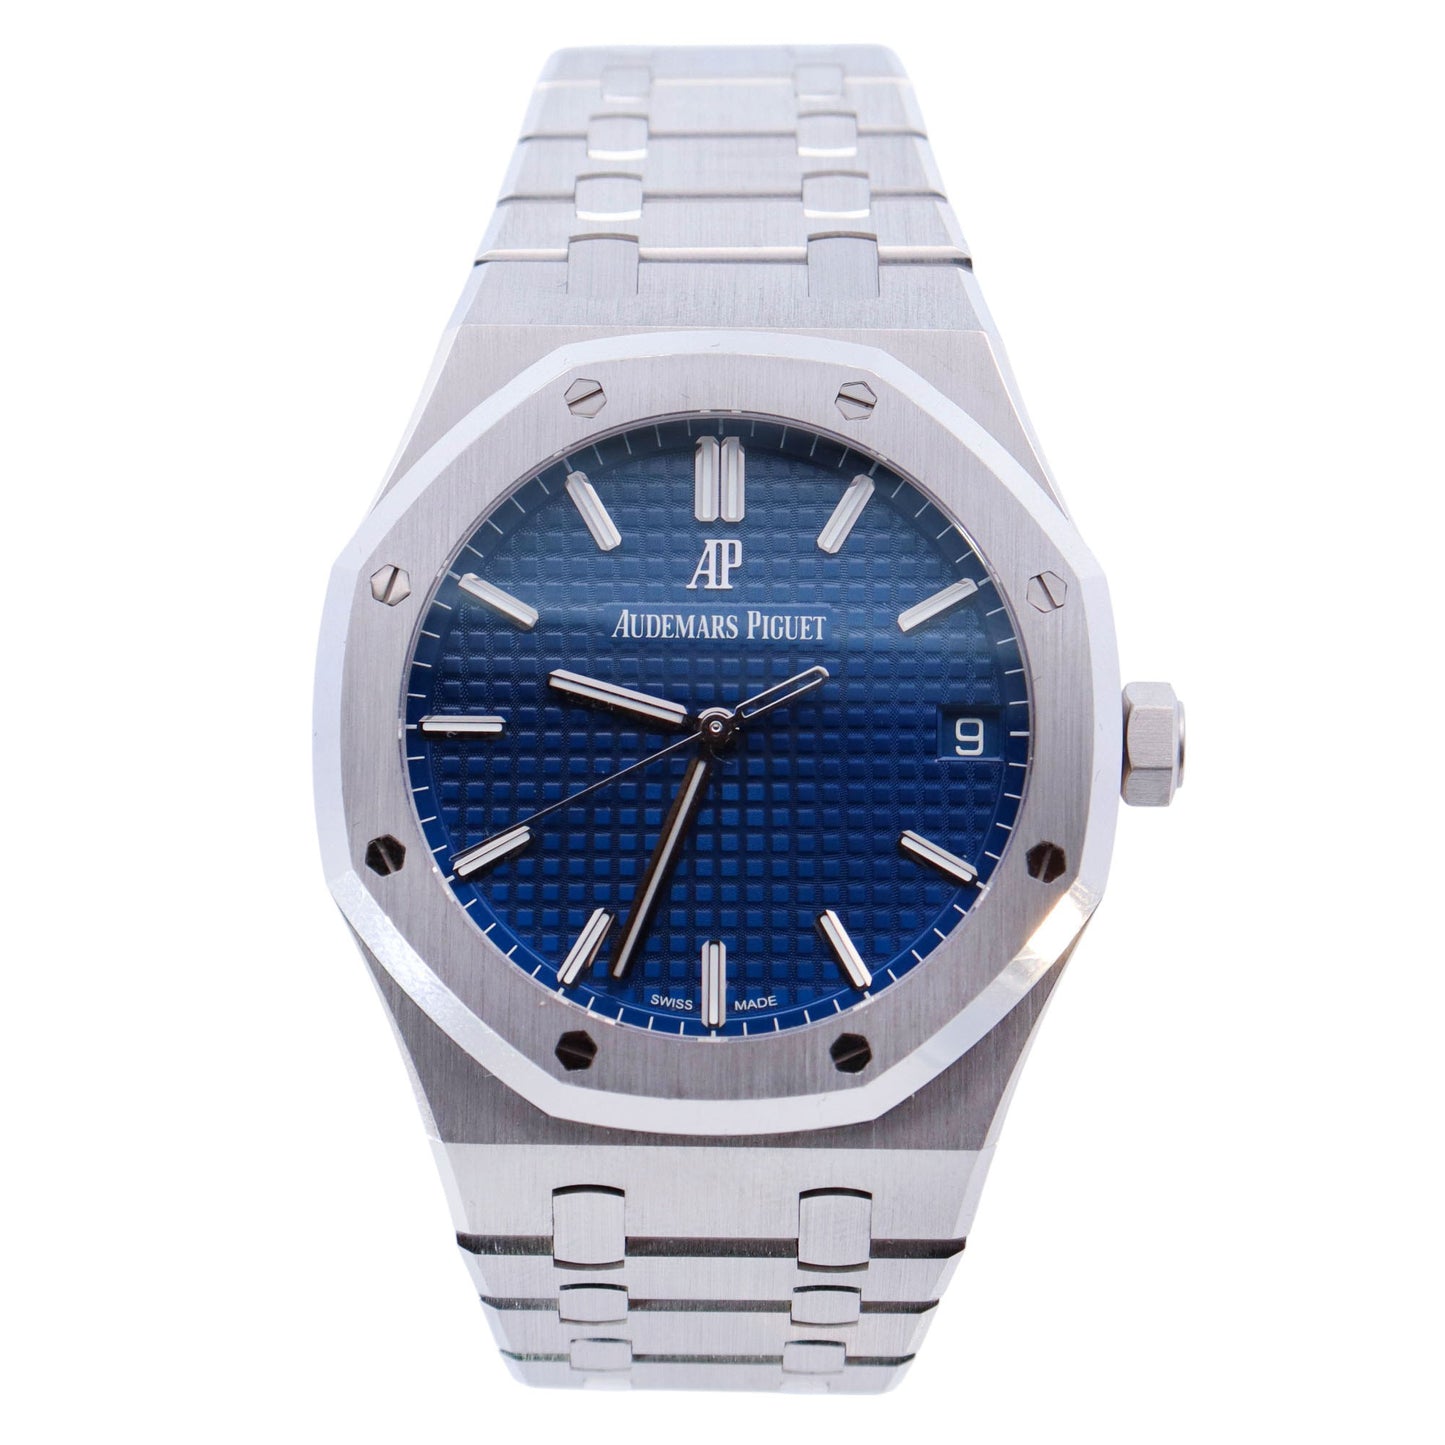 Audemars Piguet Royal Oak "Japan Edition" White Gold 41mm Blue Stick Dial Watch Reference# 15503BC.OO.1220BC.01 - Happy Jewelers Fine Jewelry Lifetime Warranty